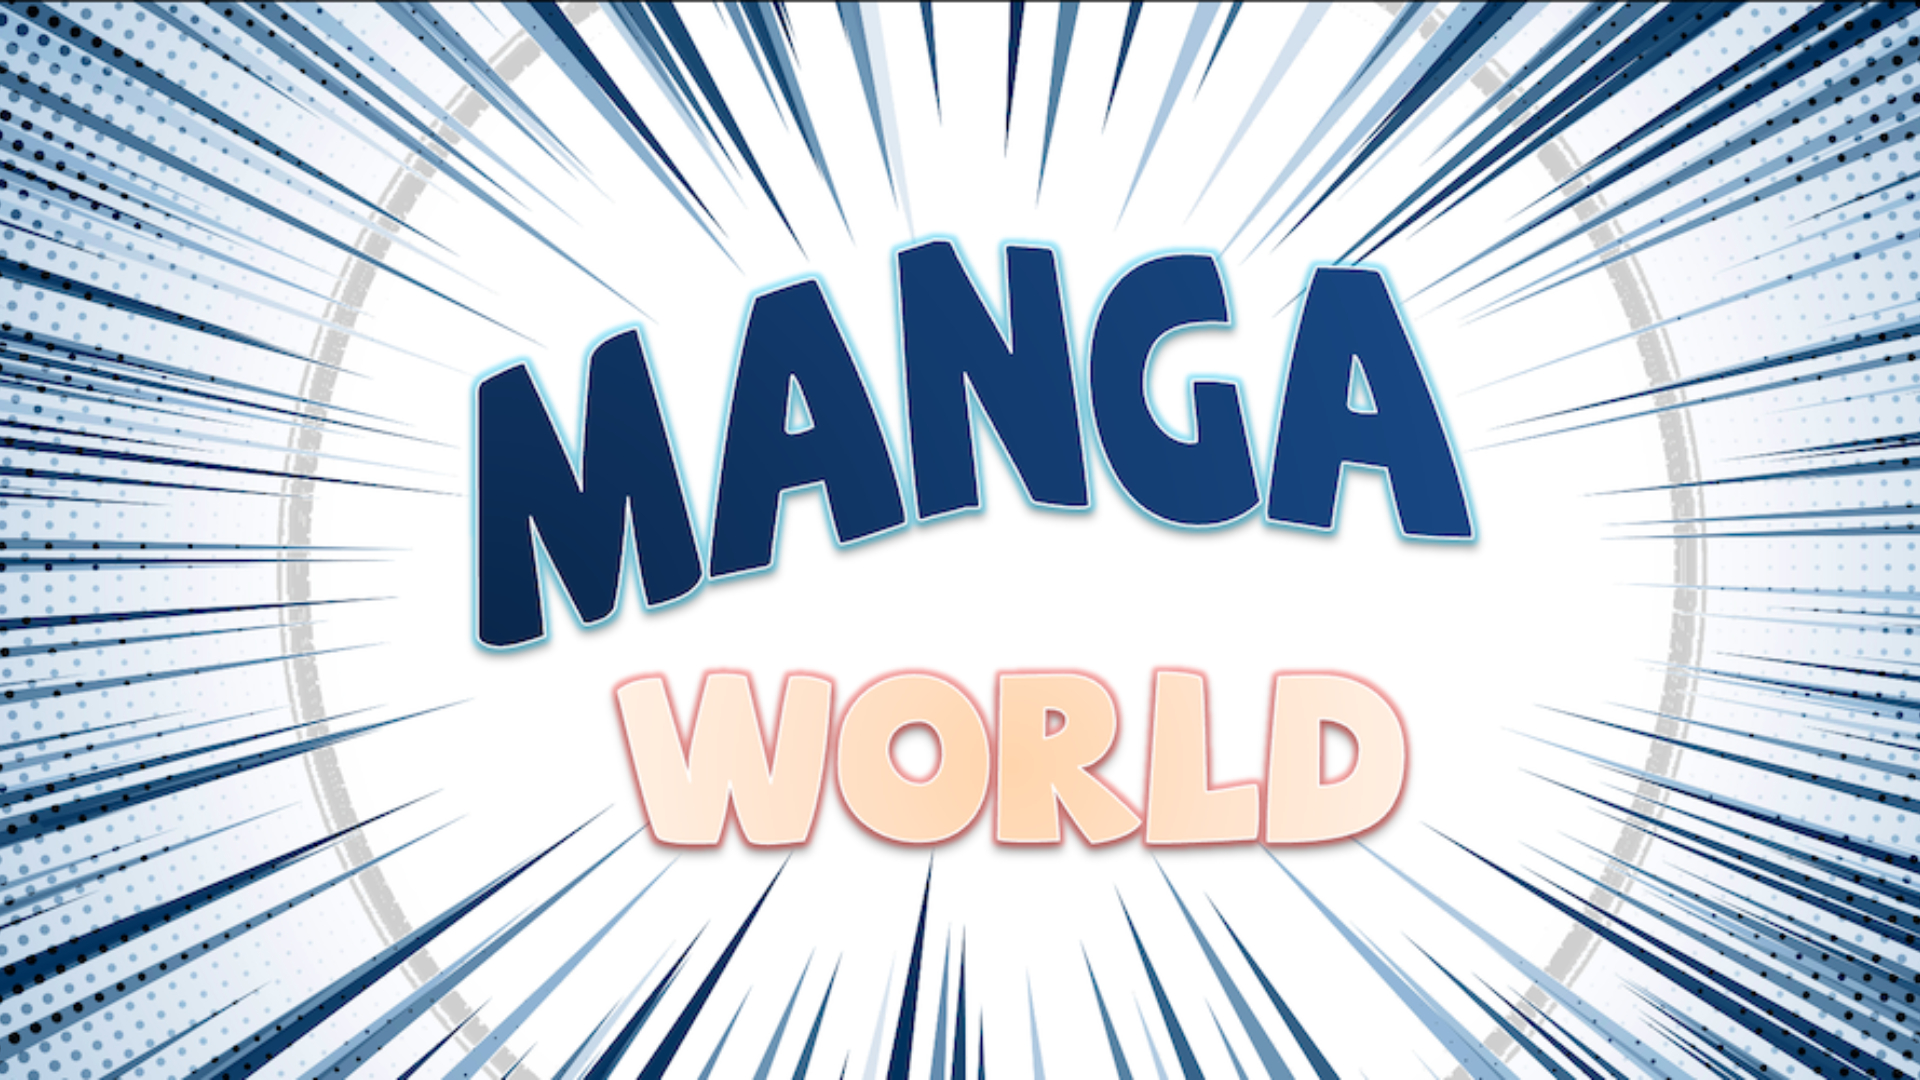 How to Download Manga World Latest Version on Android